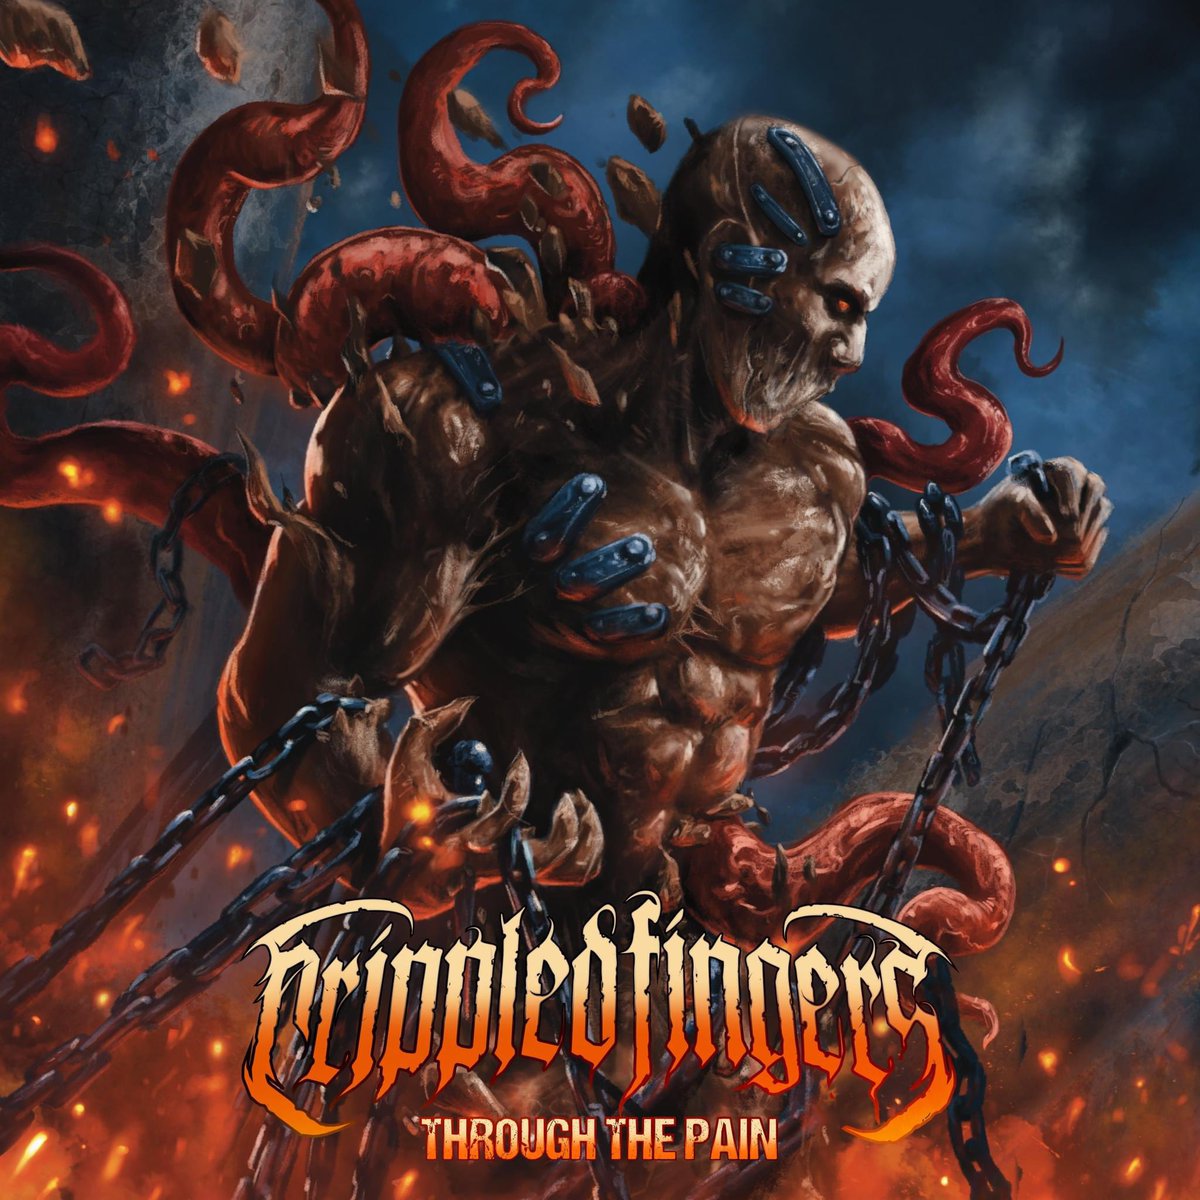 THROUGH THE PAIN is OUT NOW! 🔥 Available digitally on all streaming services. SHARE AND ENJOY Spotify: spoti.fi/3PRDoSd Buy on Bandcamp: bit.ly/3VHy9YY #newmetalmusic #metalband #thrashmetal #allnewmetal